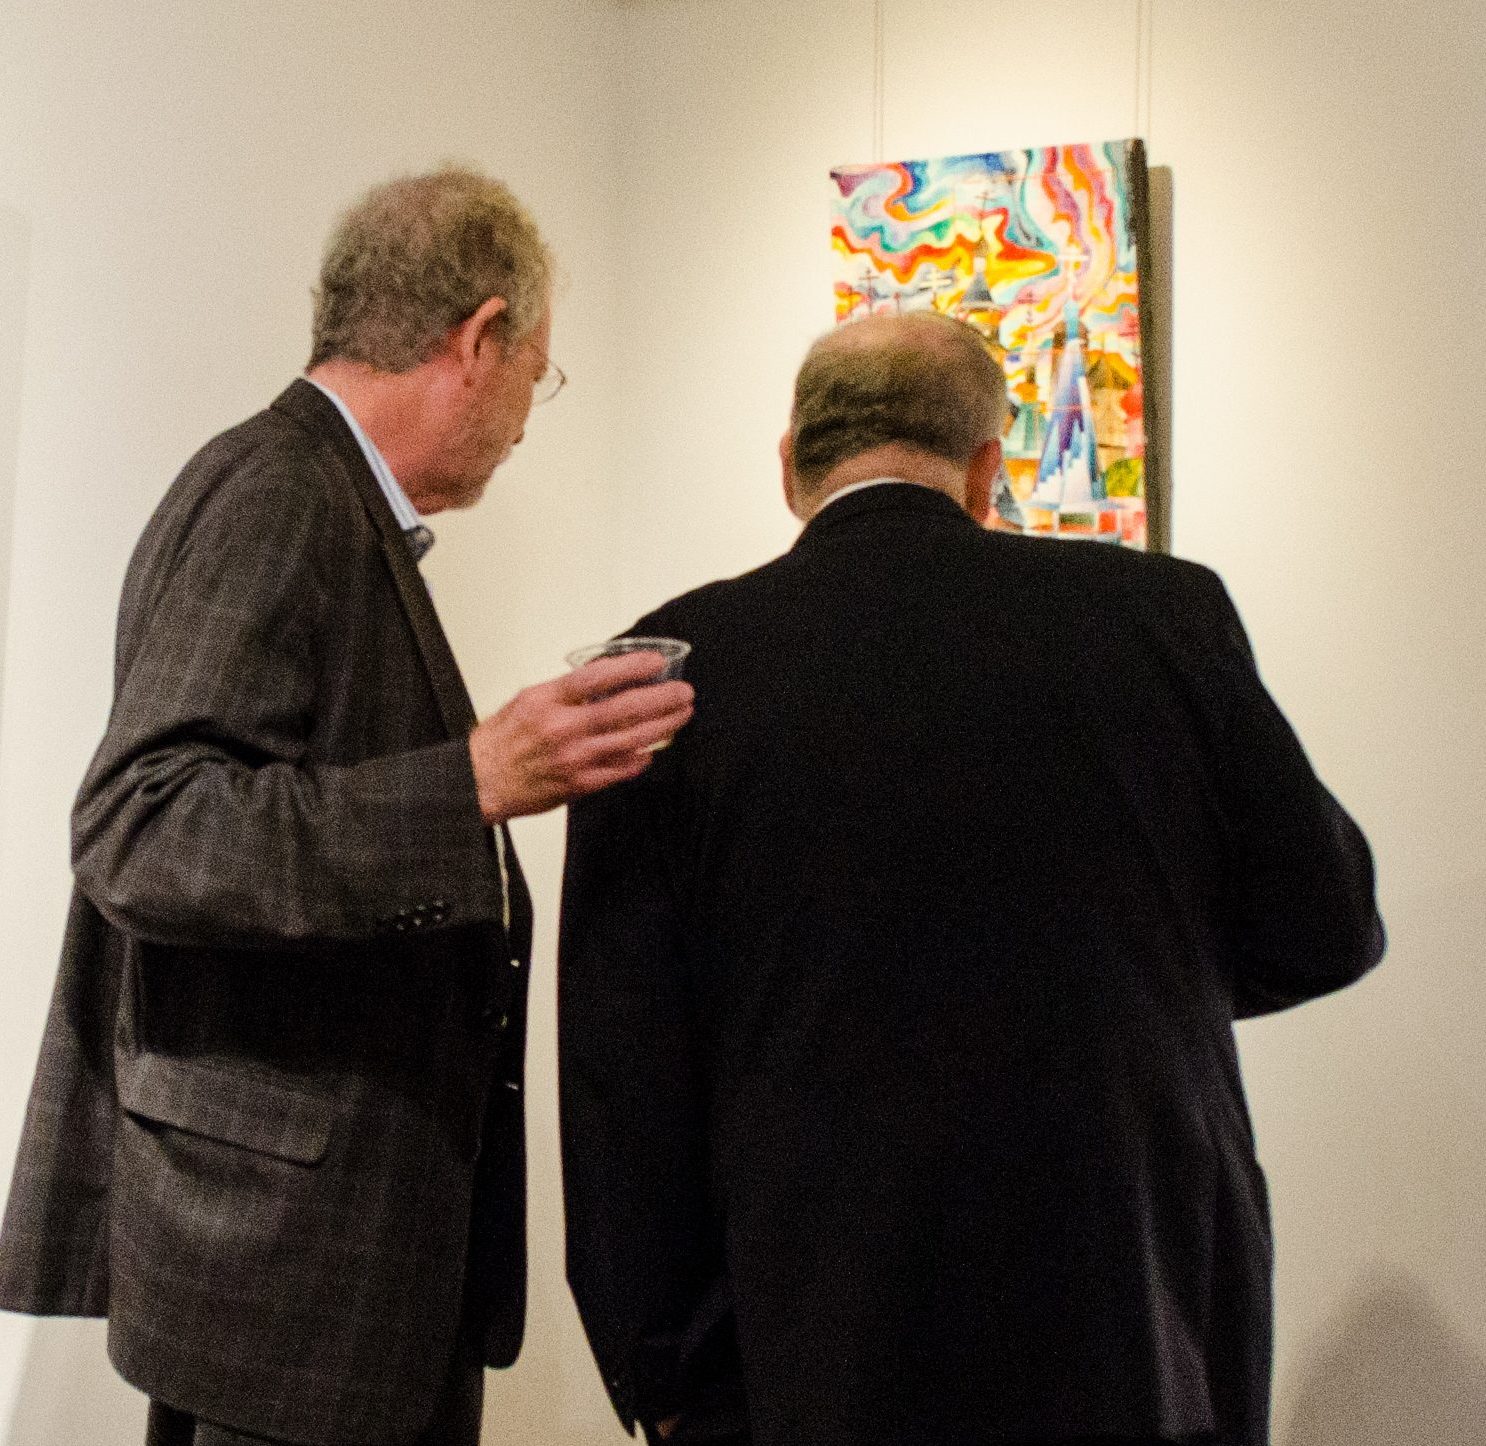 photo of two men standing and looking at art on the walls